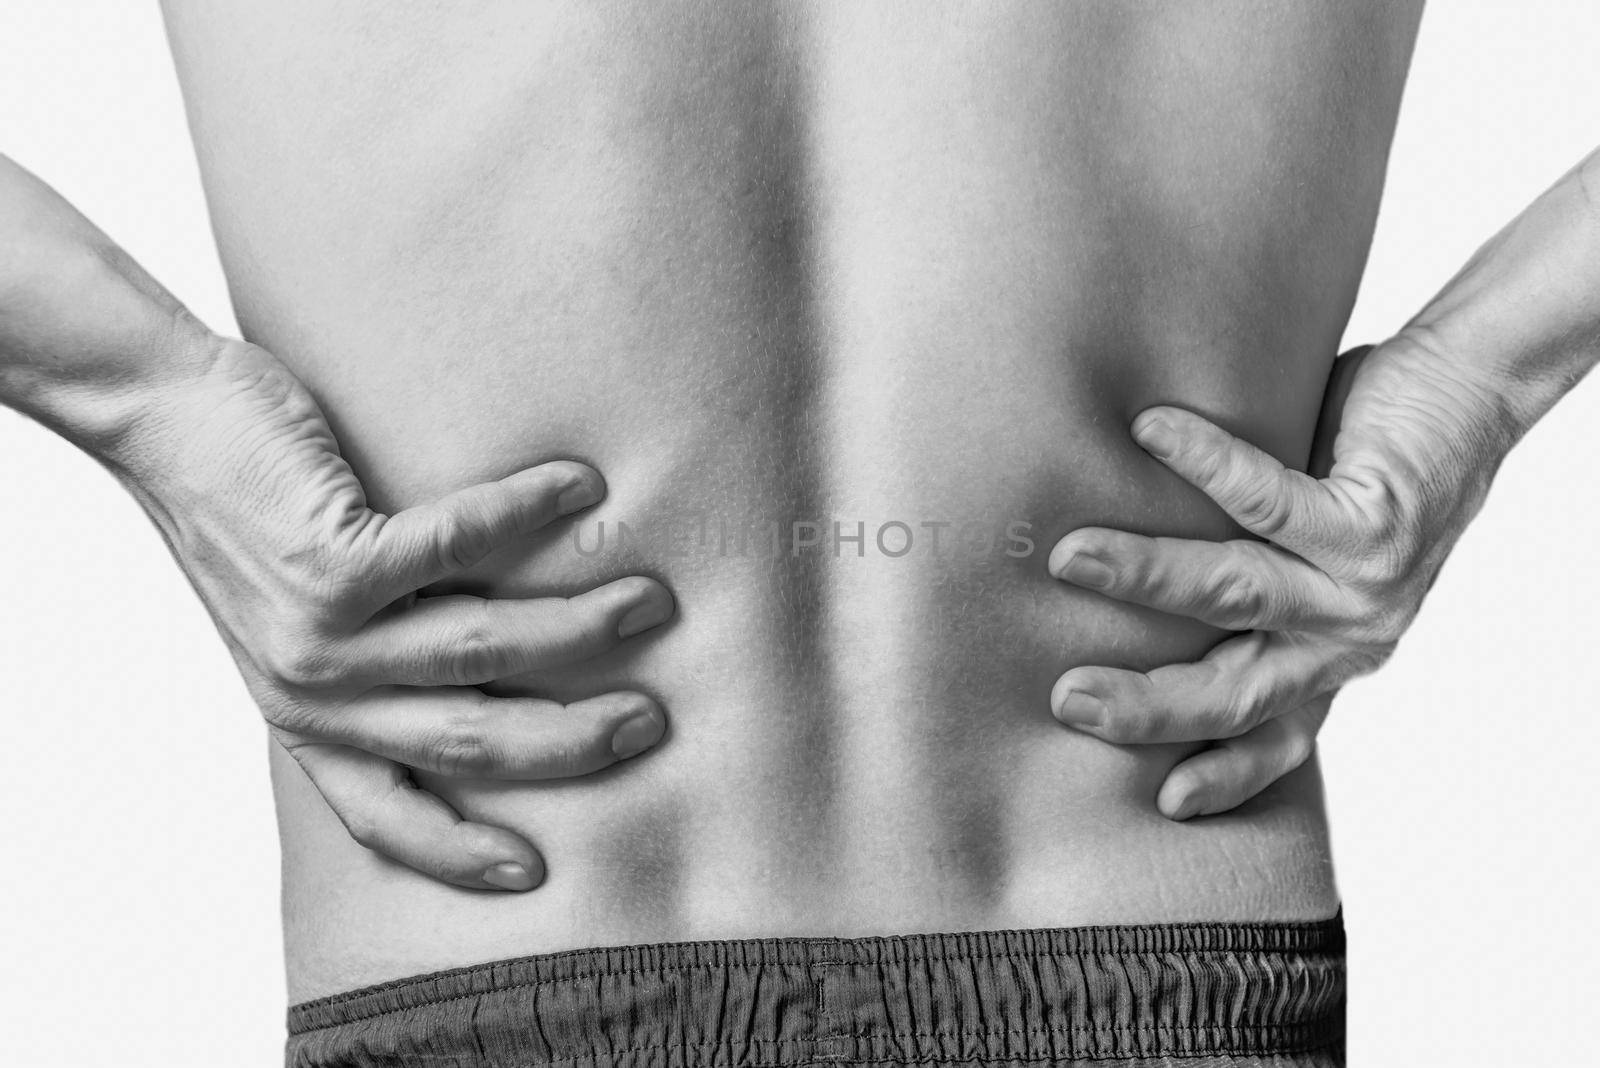 Acute pain in a male lower back. Monochrome image, isolated on a white background